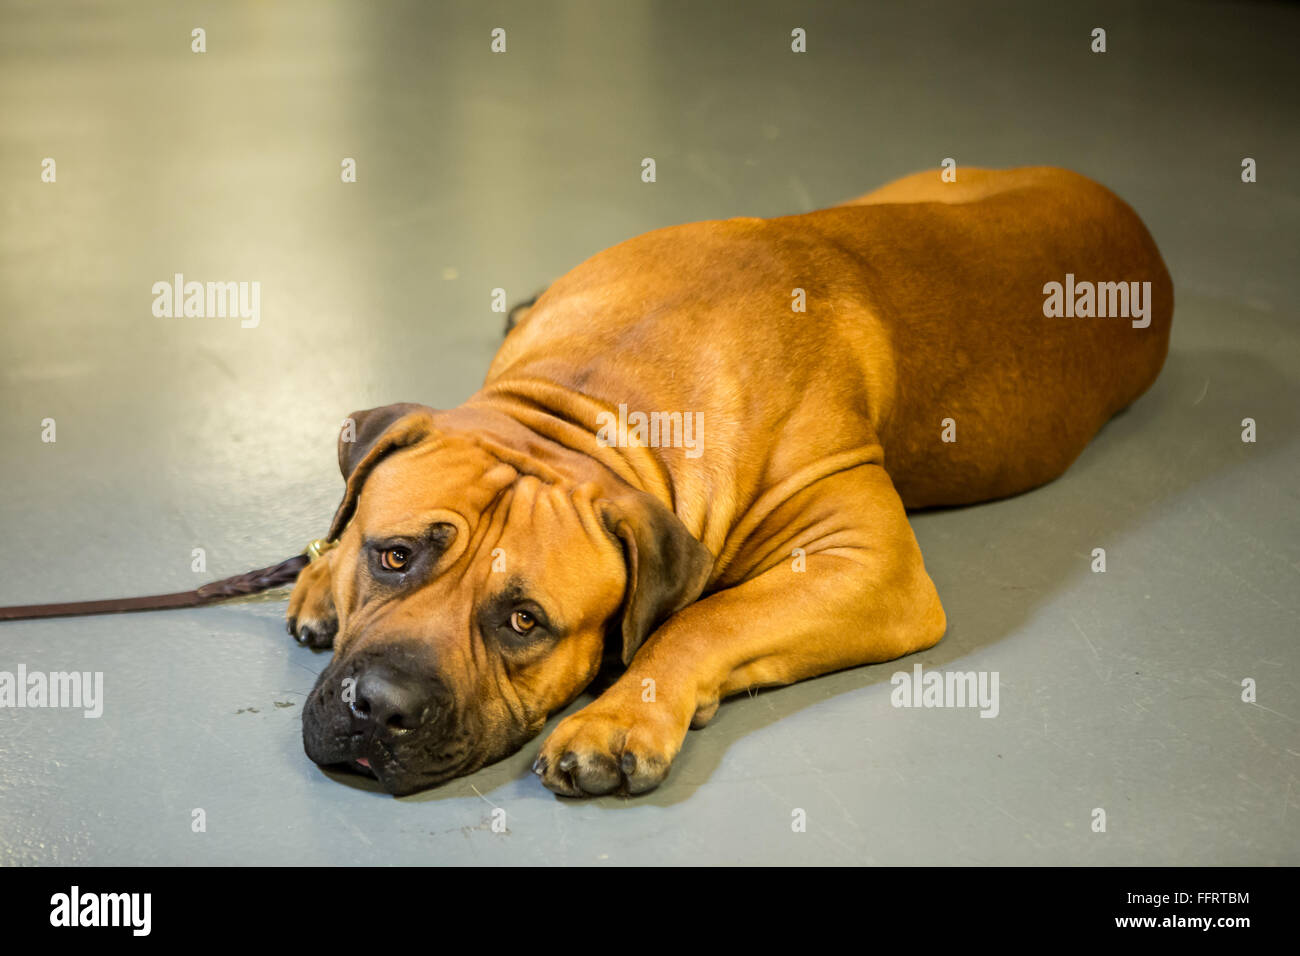 New York, USA. 16th February, 2016. A Boerboel named Oblio relaxes before entering the ring at the 140th Westminster Kennel Club Dog show in Madison Square Garden. This is the first year the breed, an African mastiff, has been recognized by the club. Credit:  Ed Lefkowicz/Alamy Live News Stock Photo